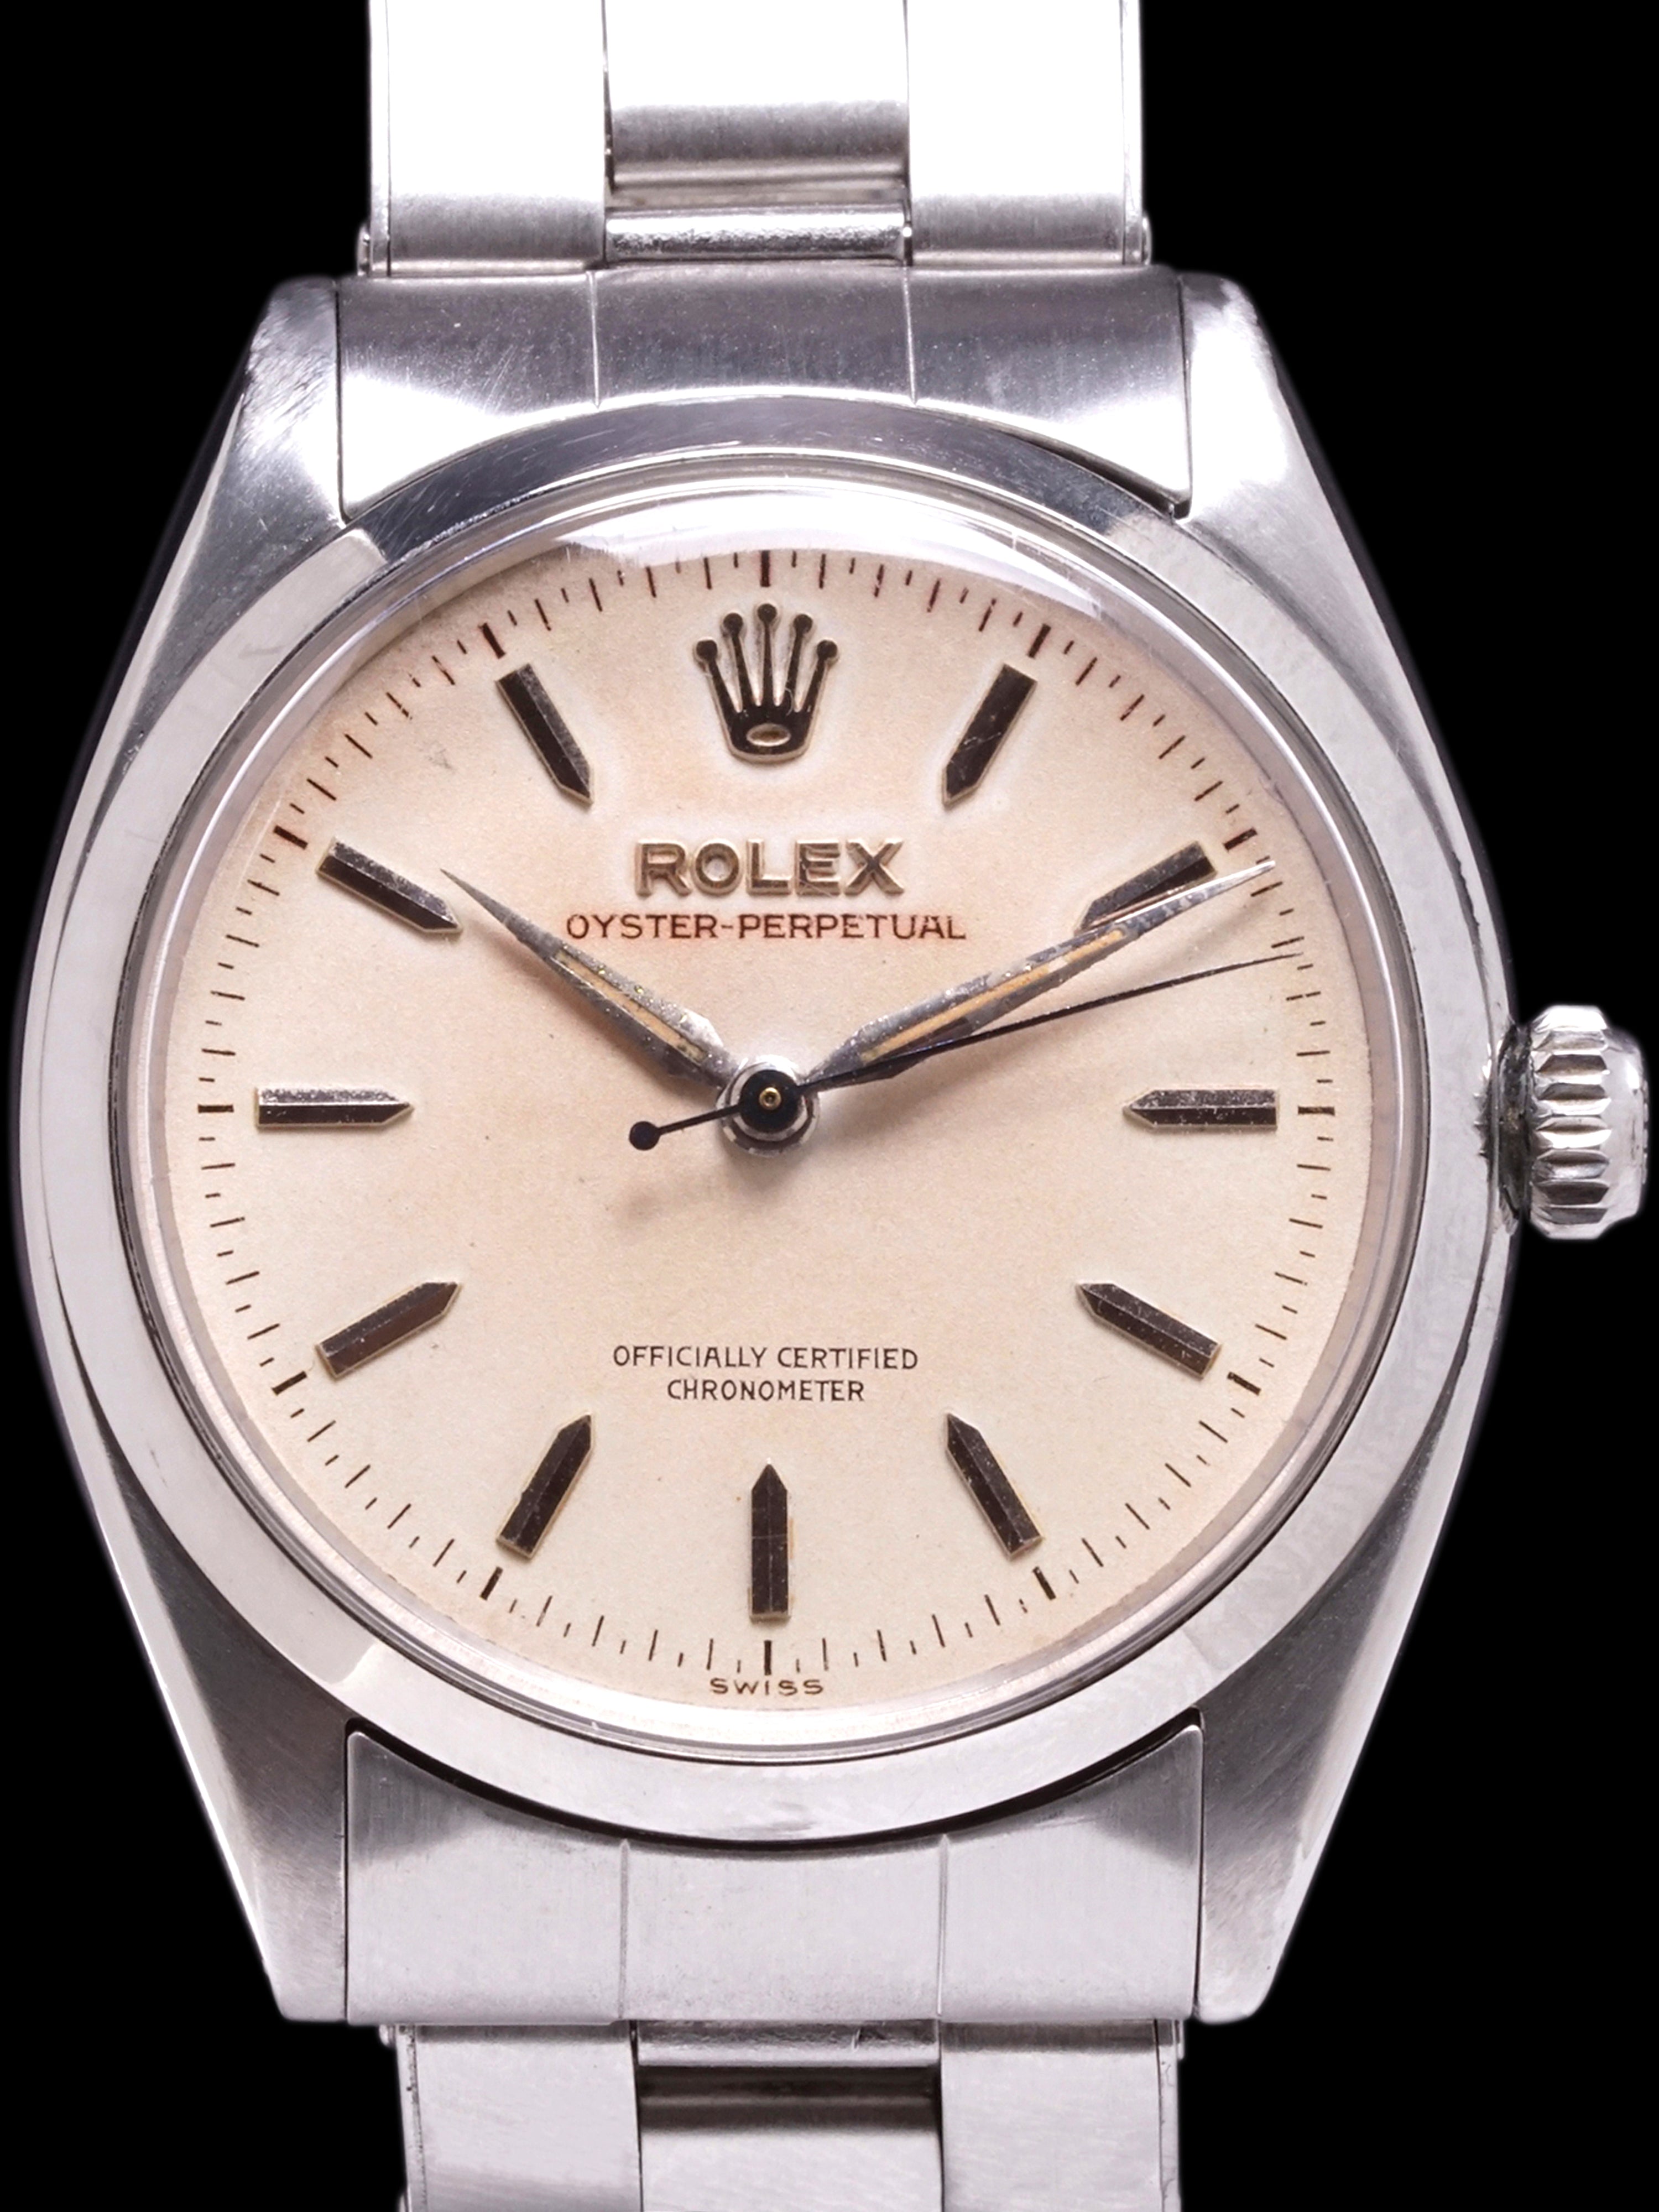 1955 Rolex Oyster-Perpetual (Ref. 6564) "OCC" Dial